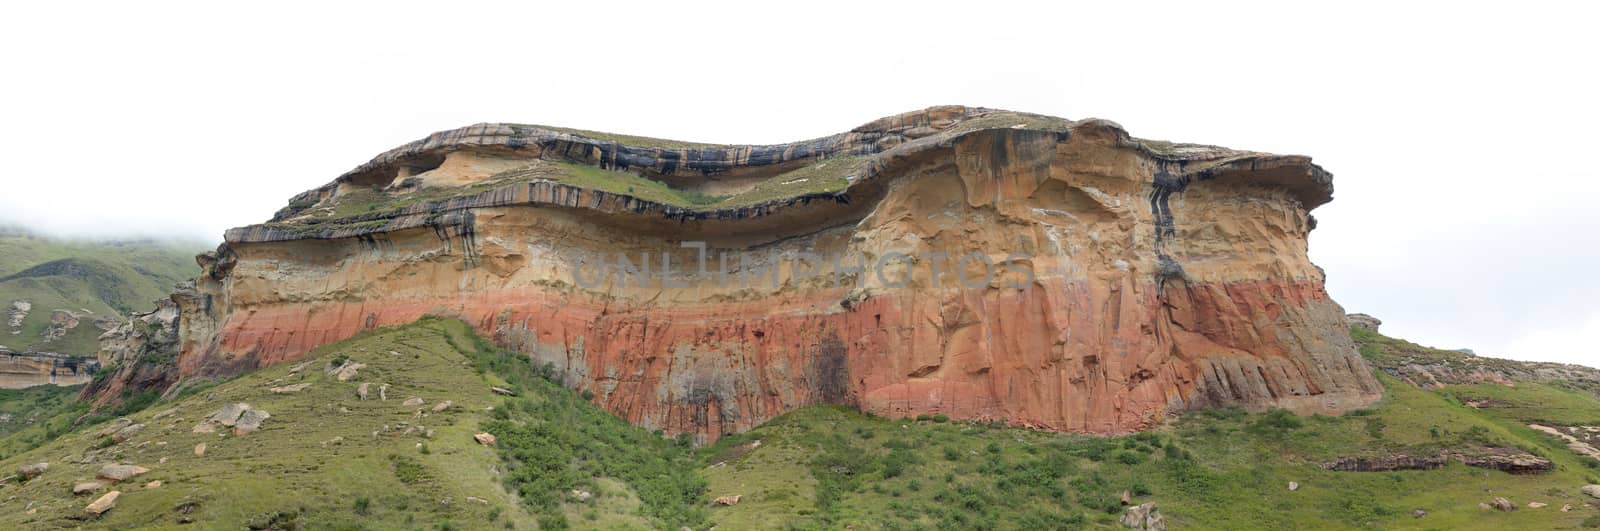 Mushroom Rocks in the Golden Gate Highlands National Park, South Africa. Stitched panorama from 7 separate photos